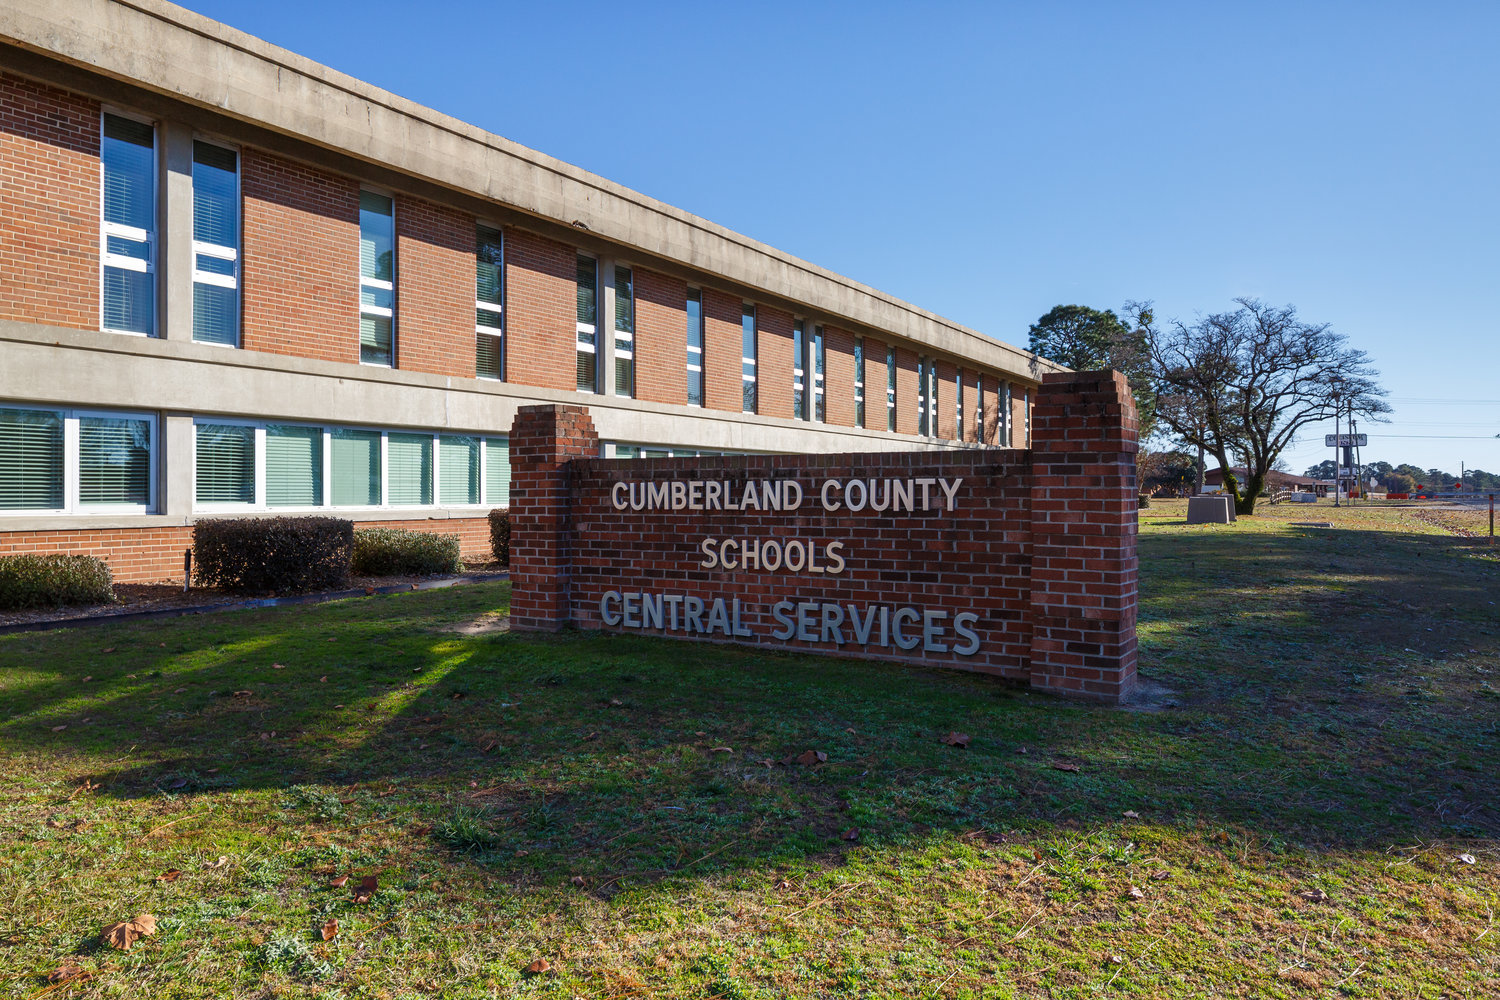 The Cumberland County Board of Education on Tuesday night unanimously approved the superintendent’s proposed budget for the 2022-23 school year.